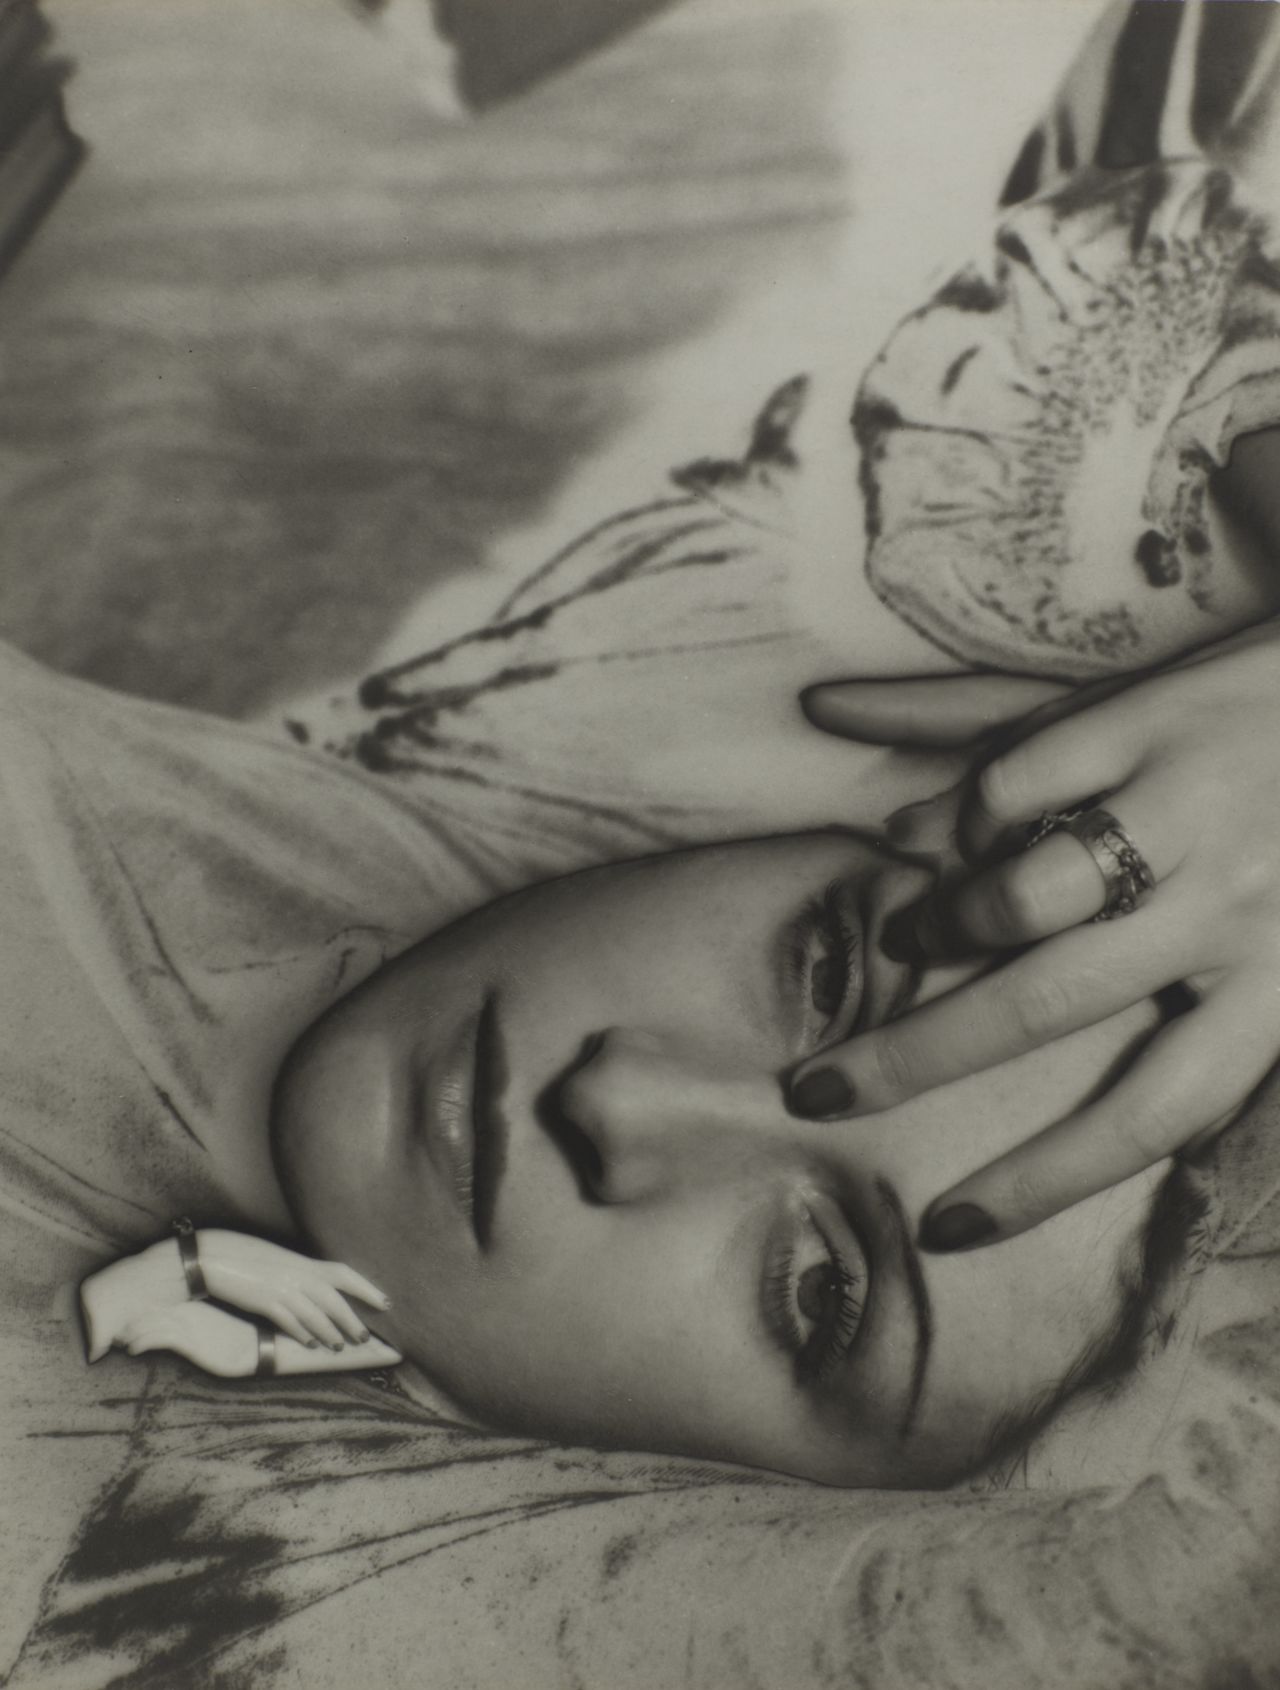 Dora Maar photographed by Man Ray in 1936